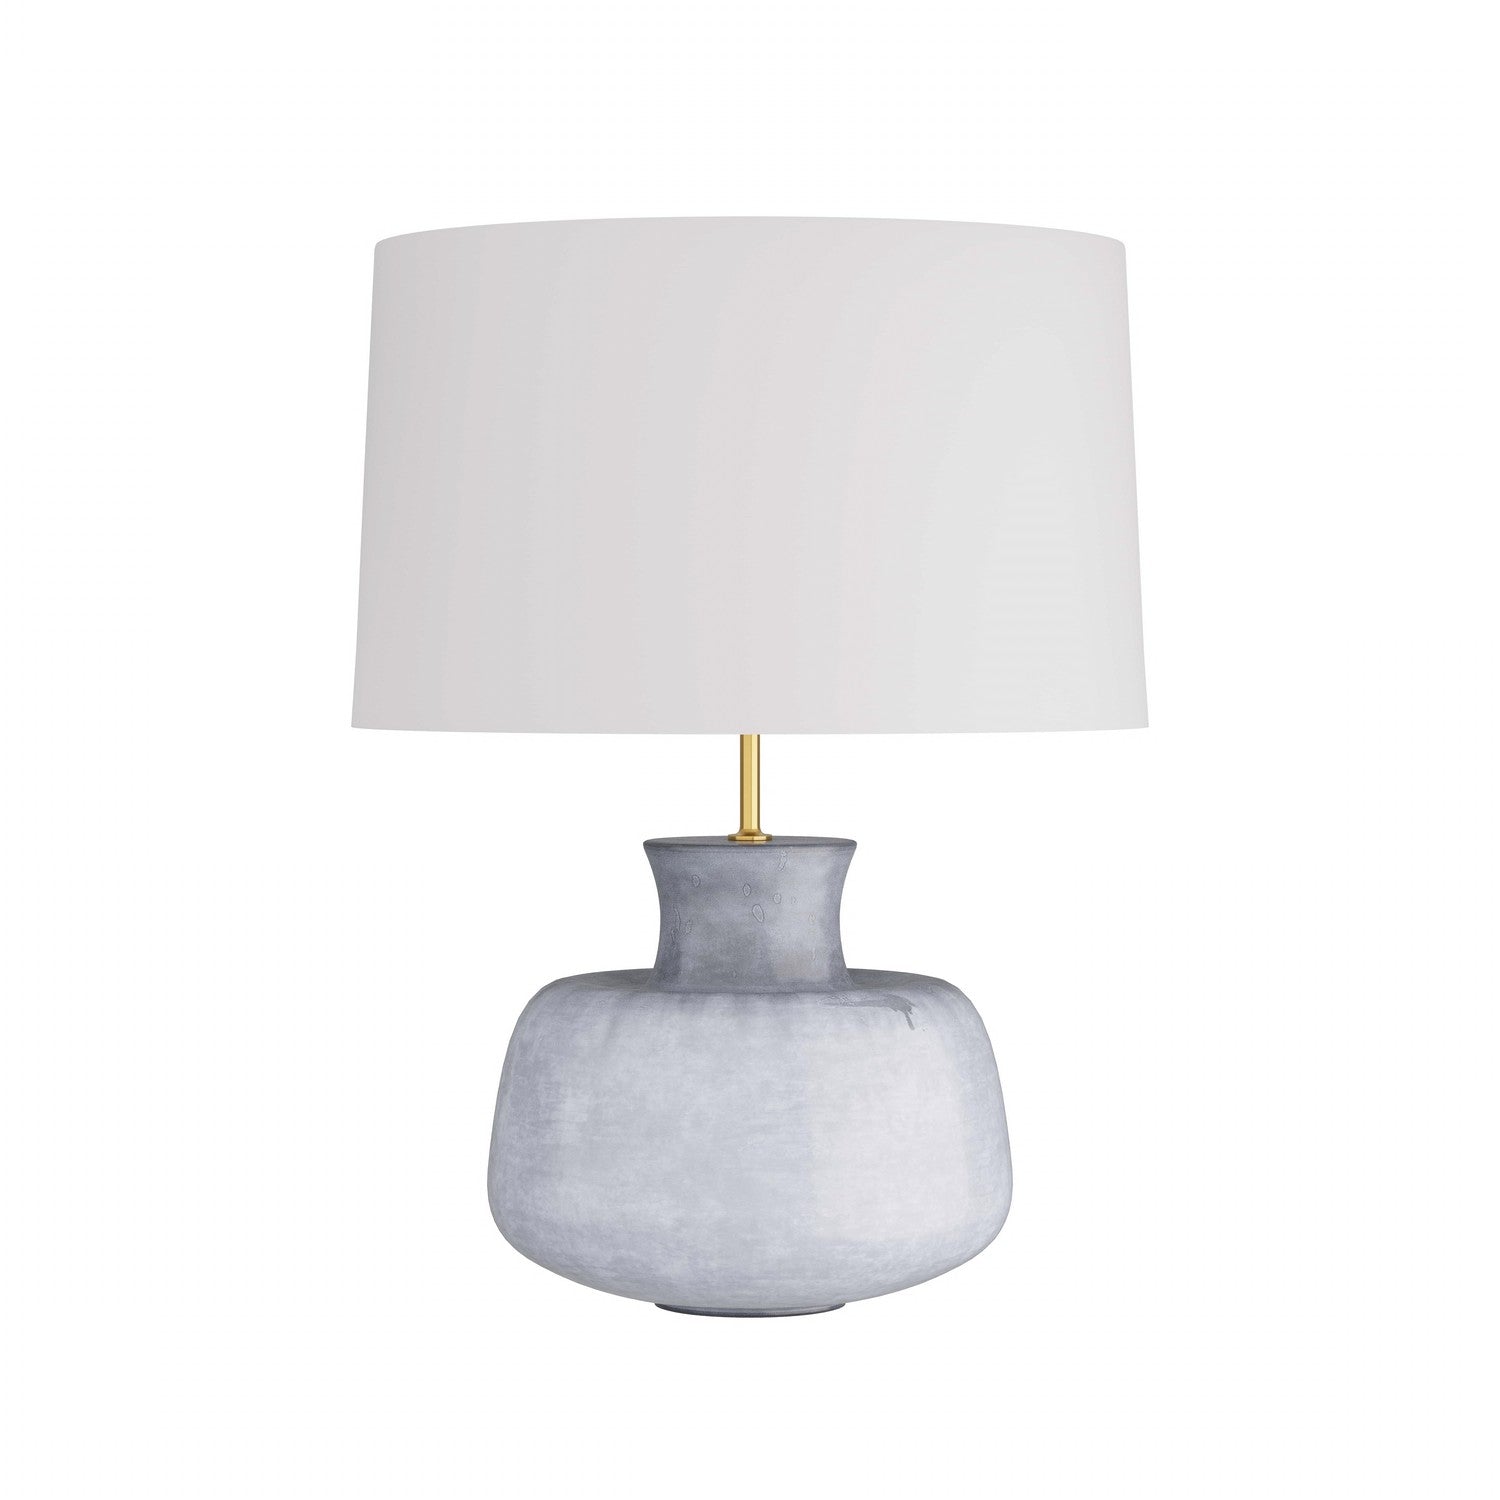 One Light Table Lamp from the Tabor collection in Frosted Blue Reactive finish